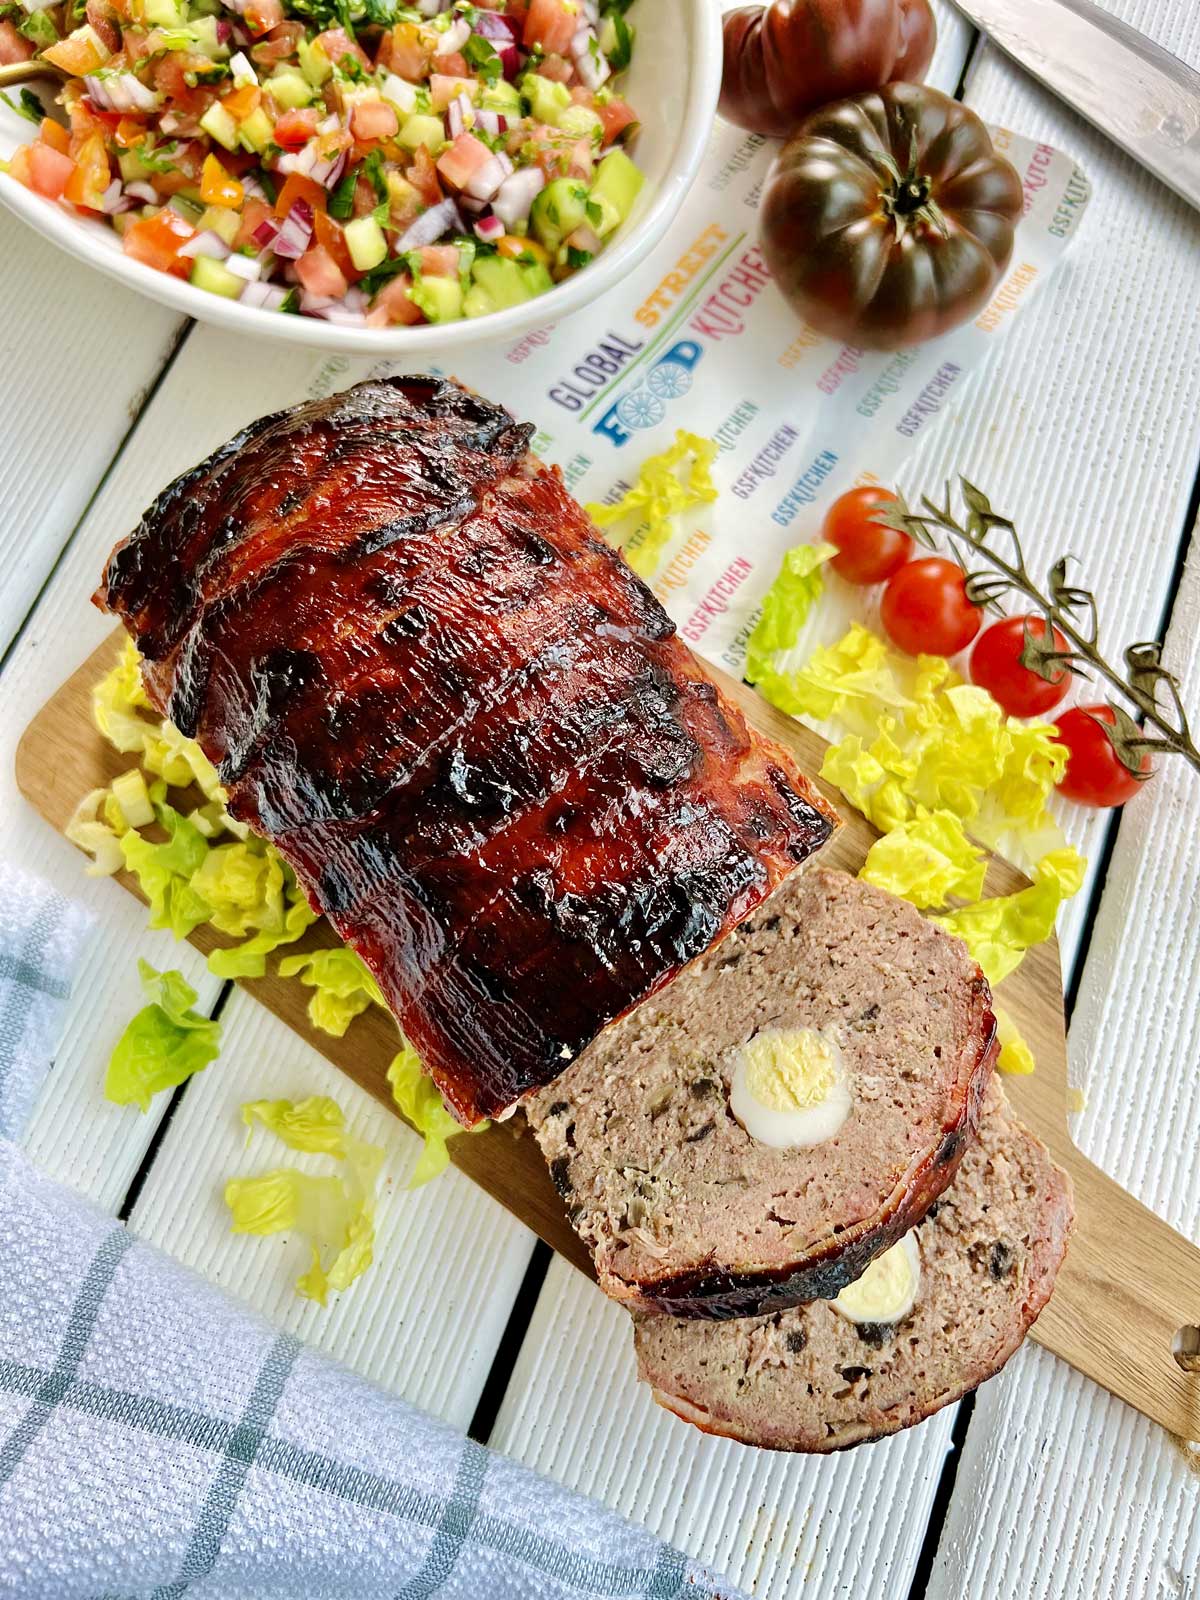 Birdsview off smoked meatloaf on a chopping board with salad, scattered around tomatoes and a bowl of salad.